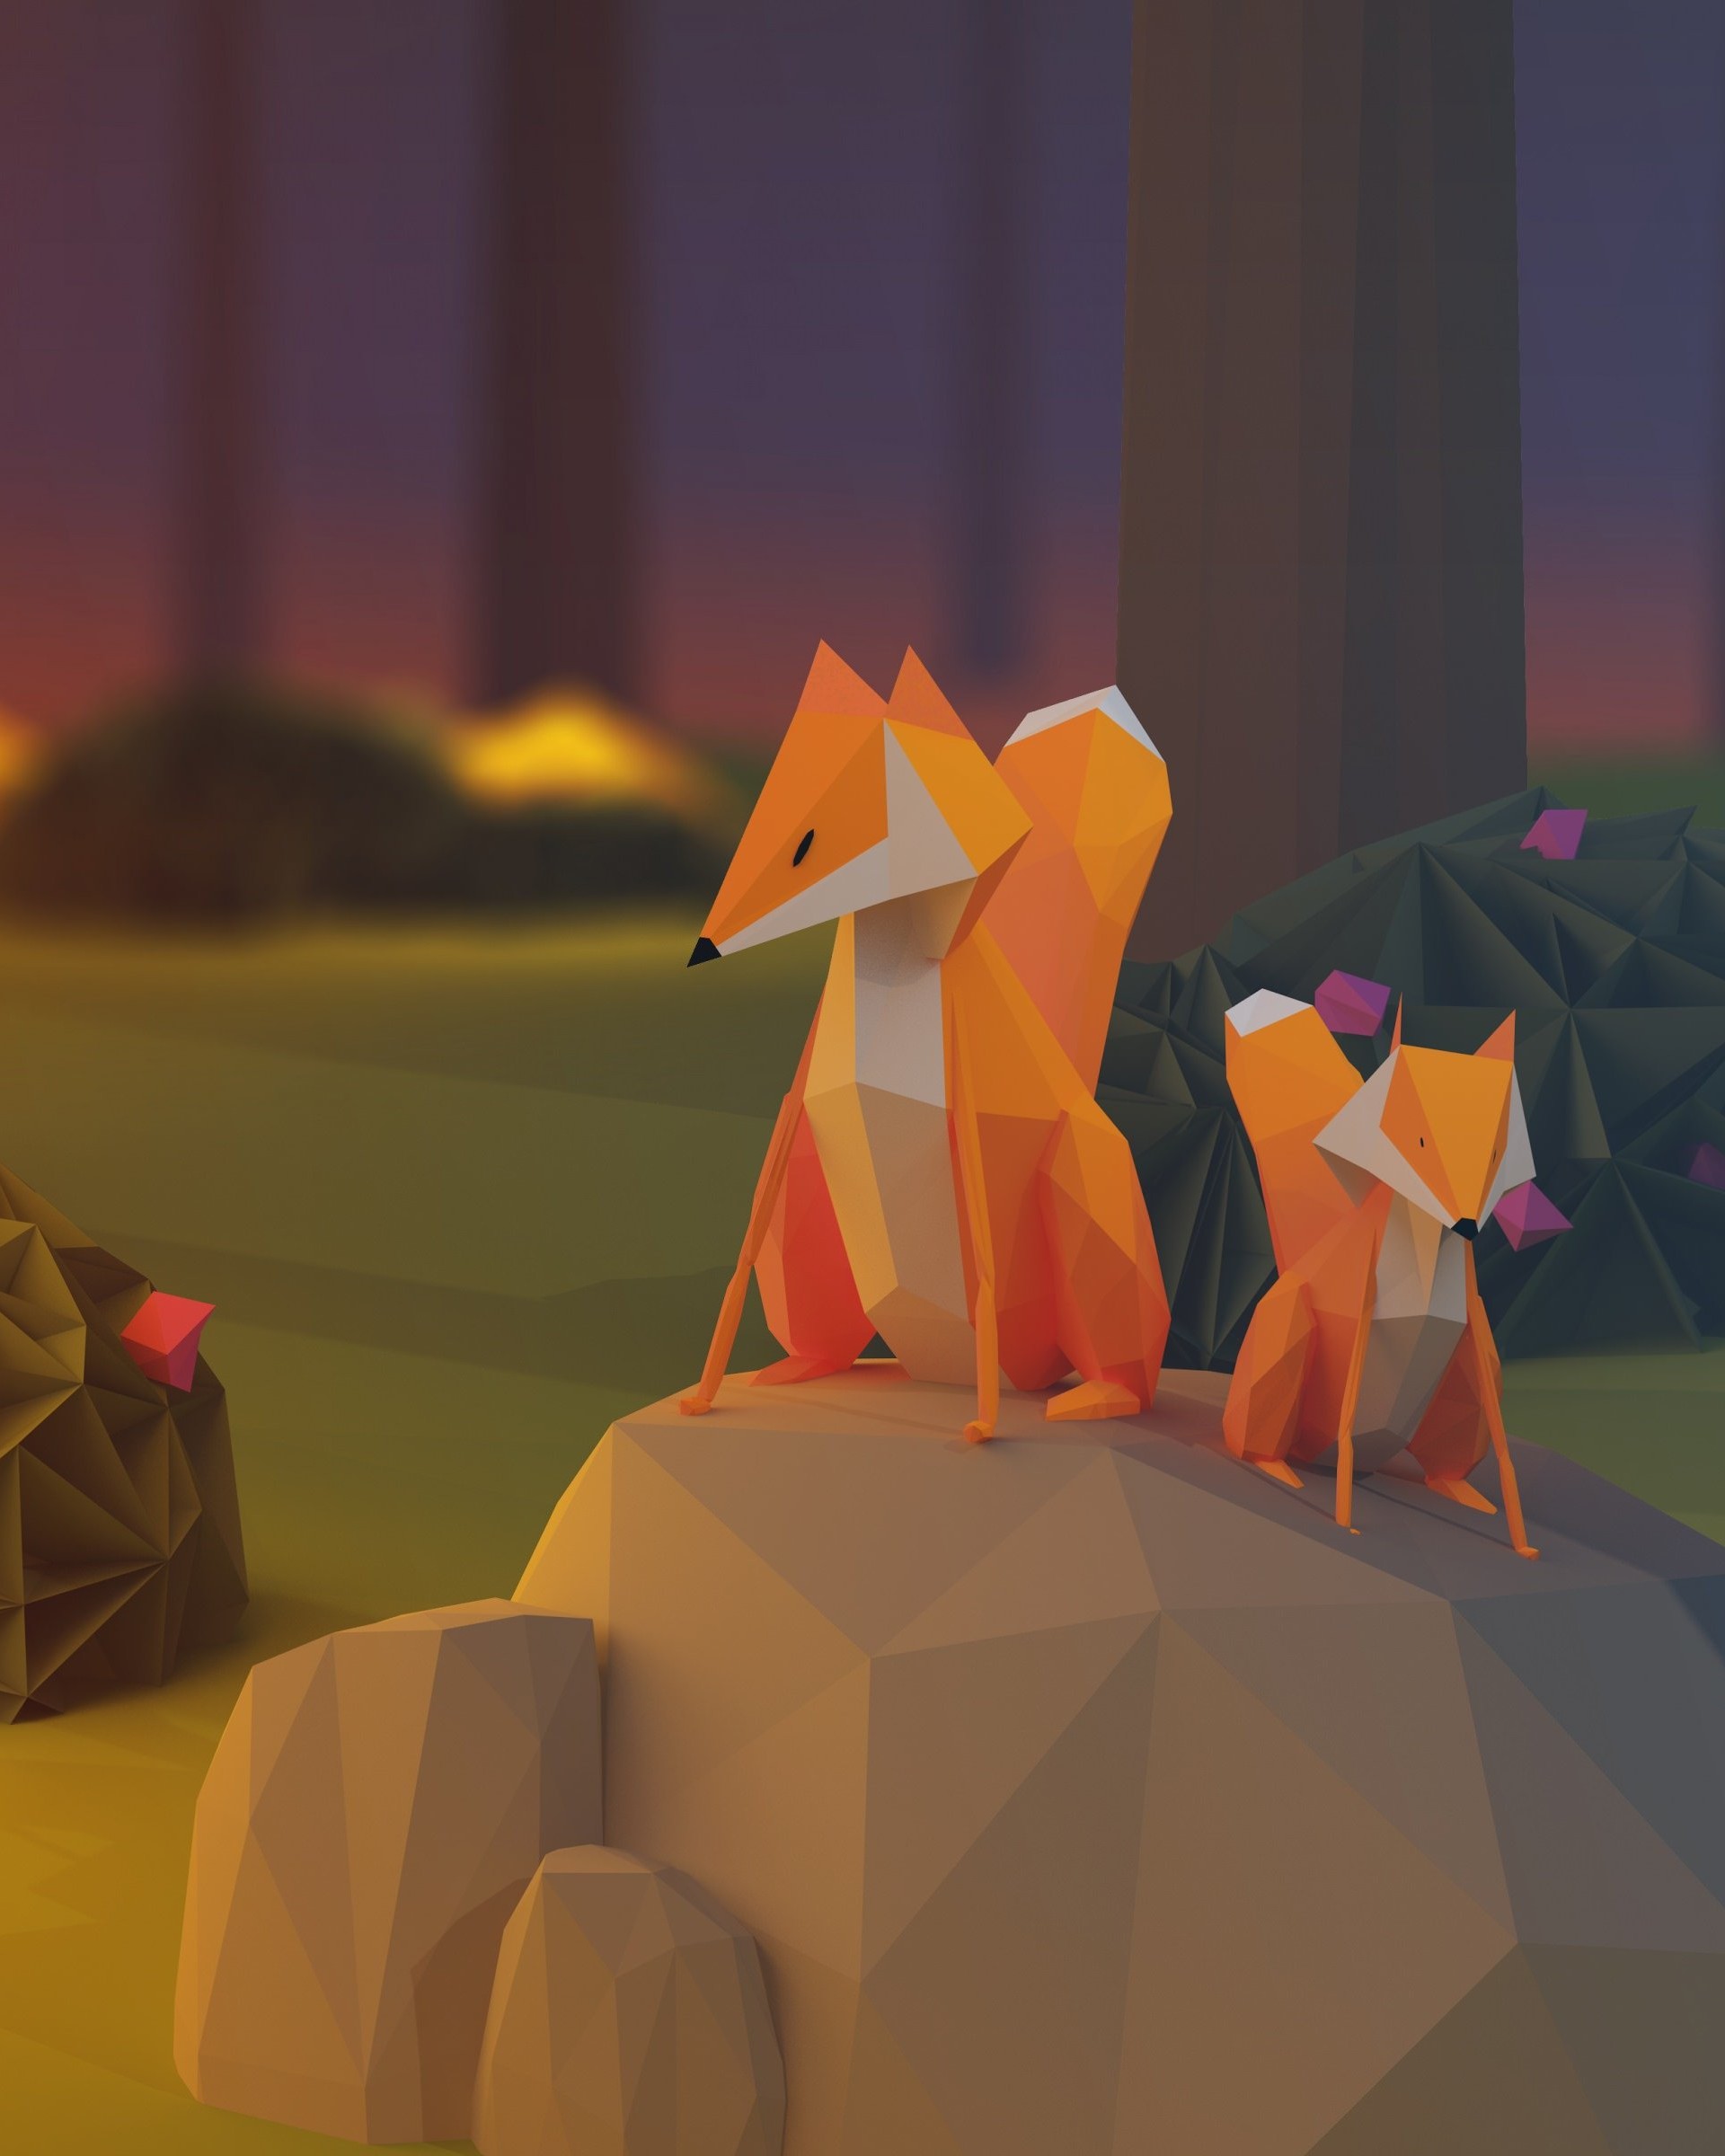 Low Poly Foxes Wallpaper for Google Nexus 7